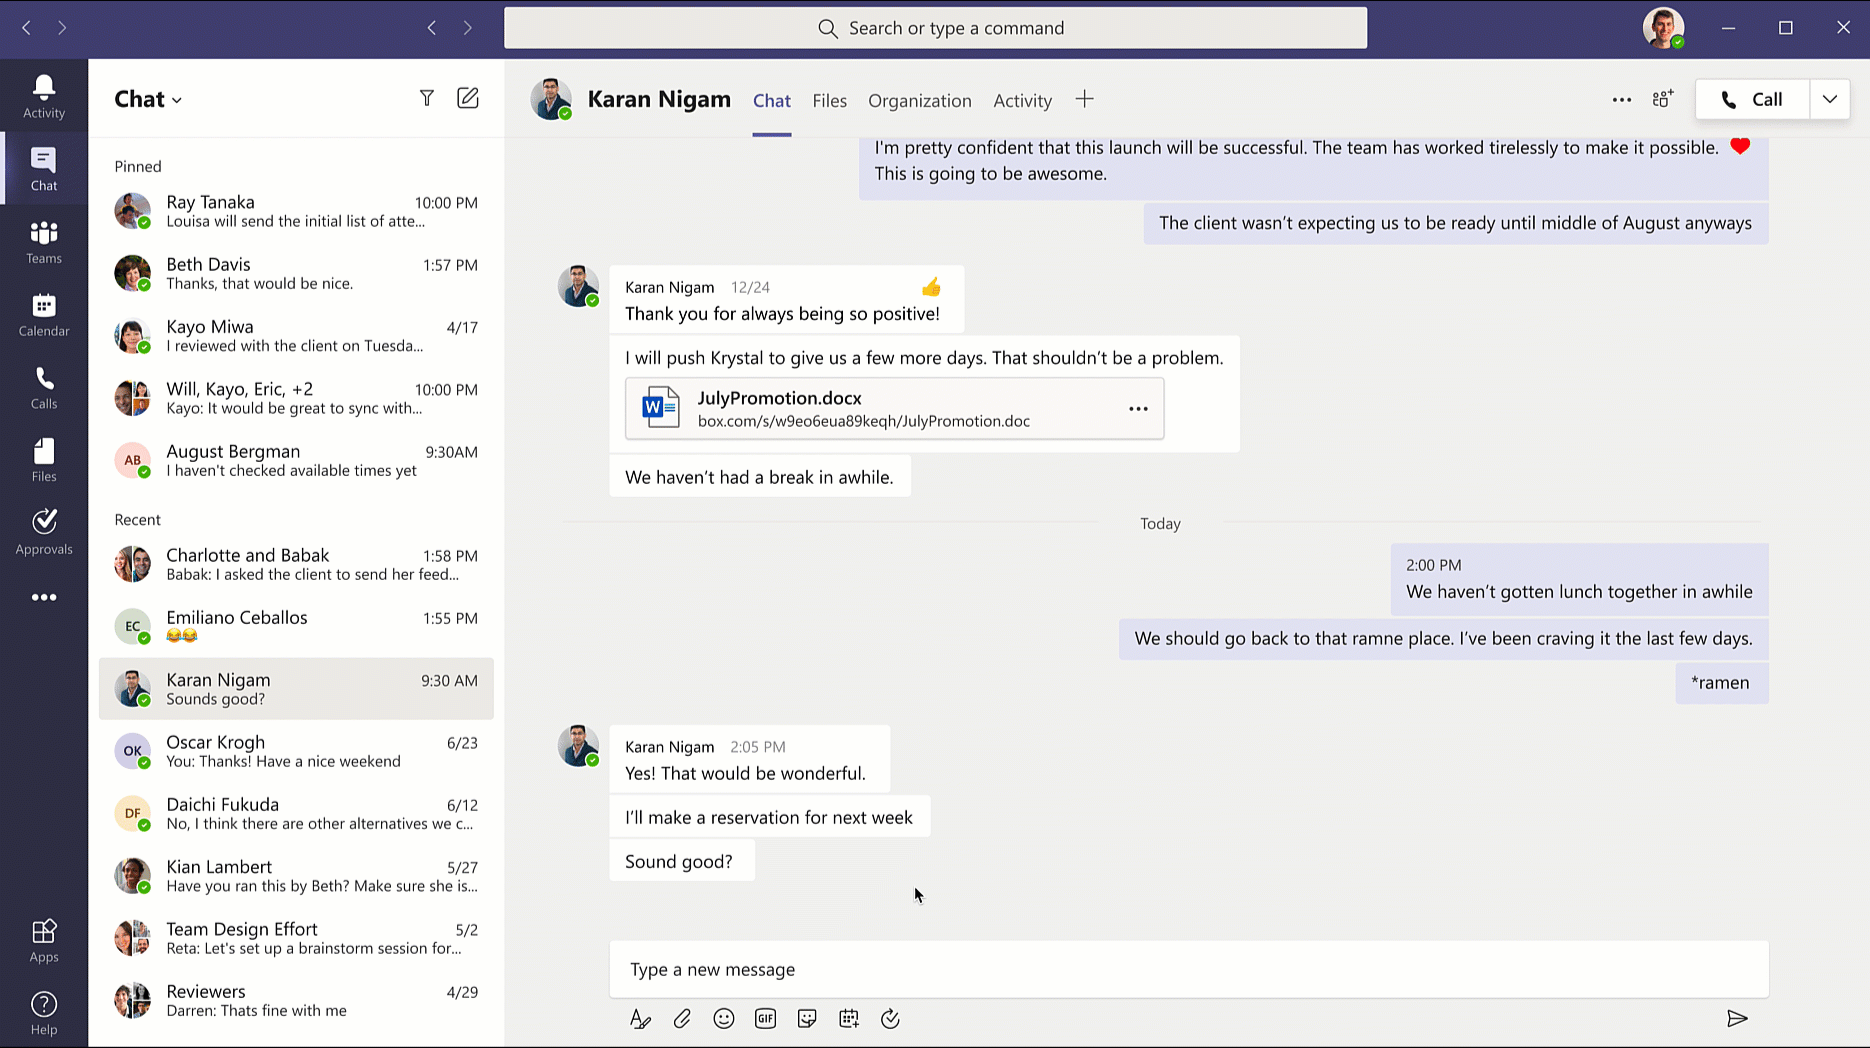 Approvals app now available on Microsoft Teams